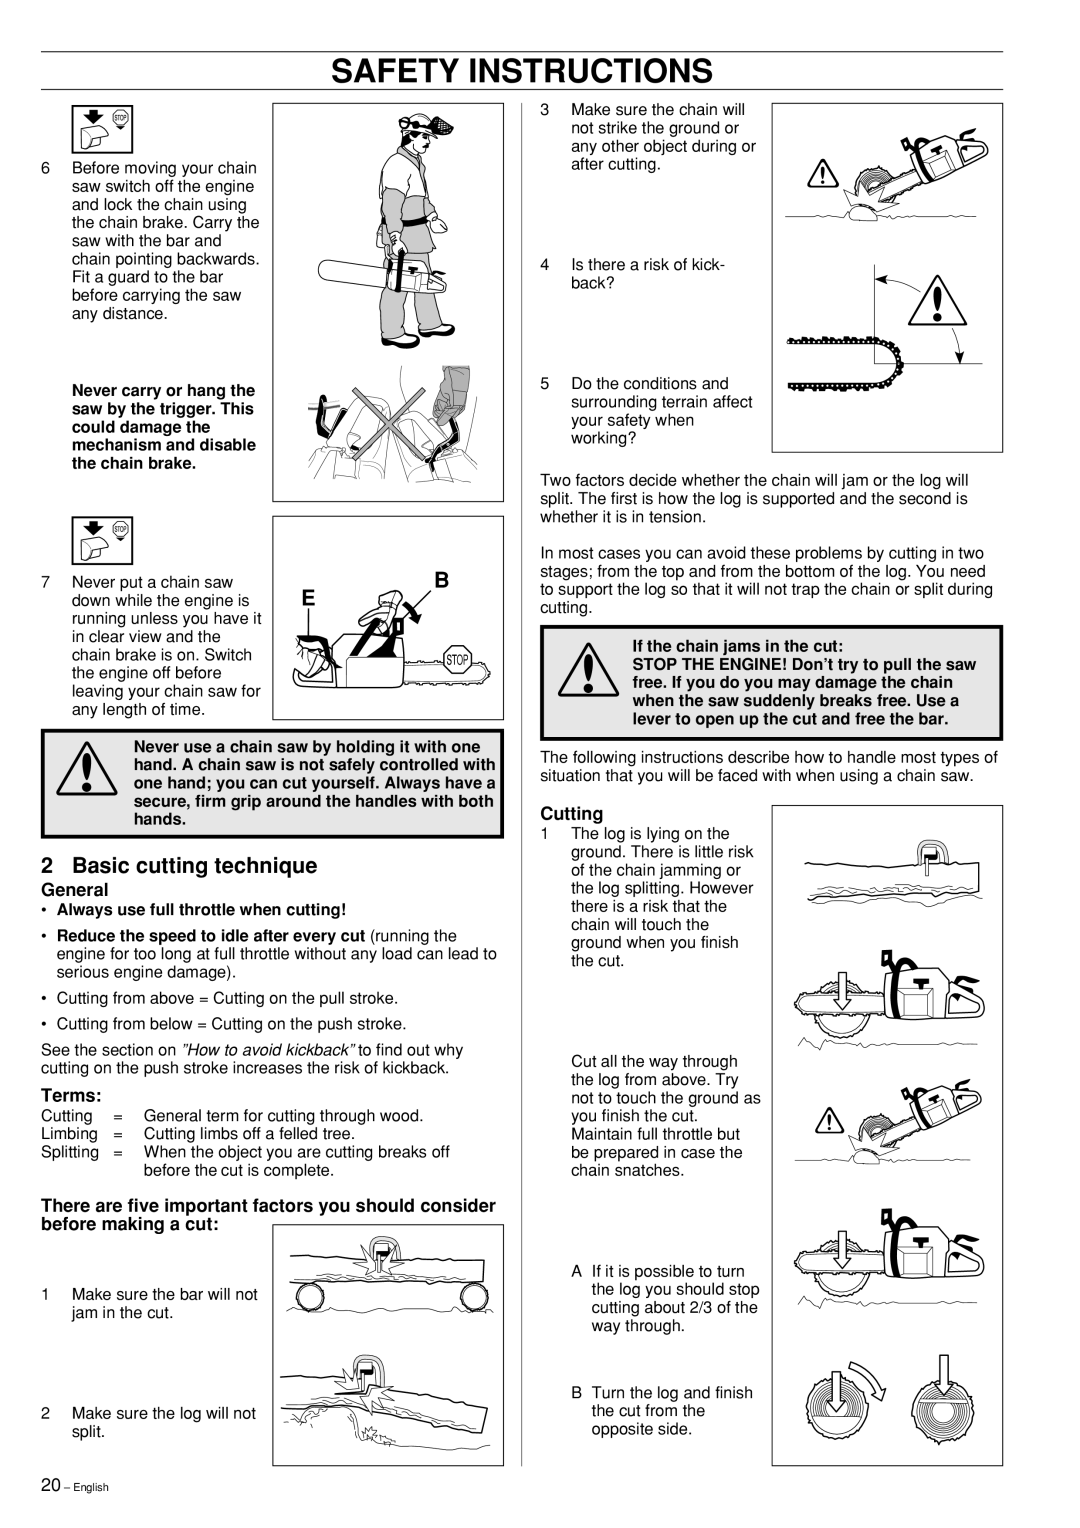 Husqvarna 353, 346XP manual Safety Instructions, Basic cutting technique, General, Terms, Cutting 